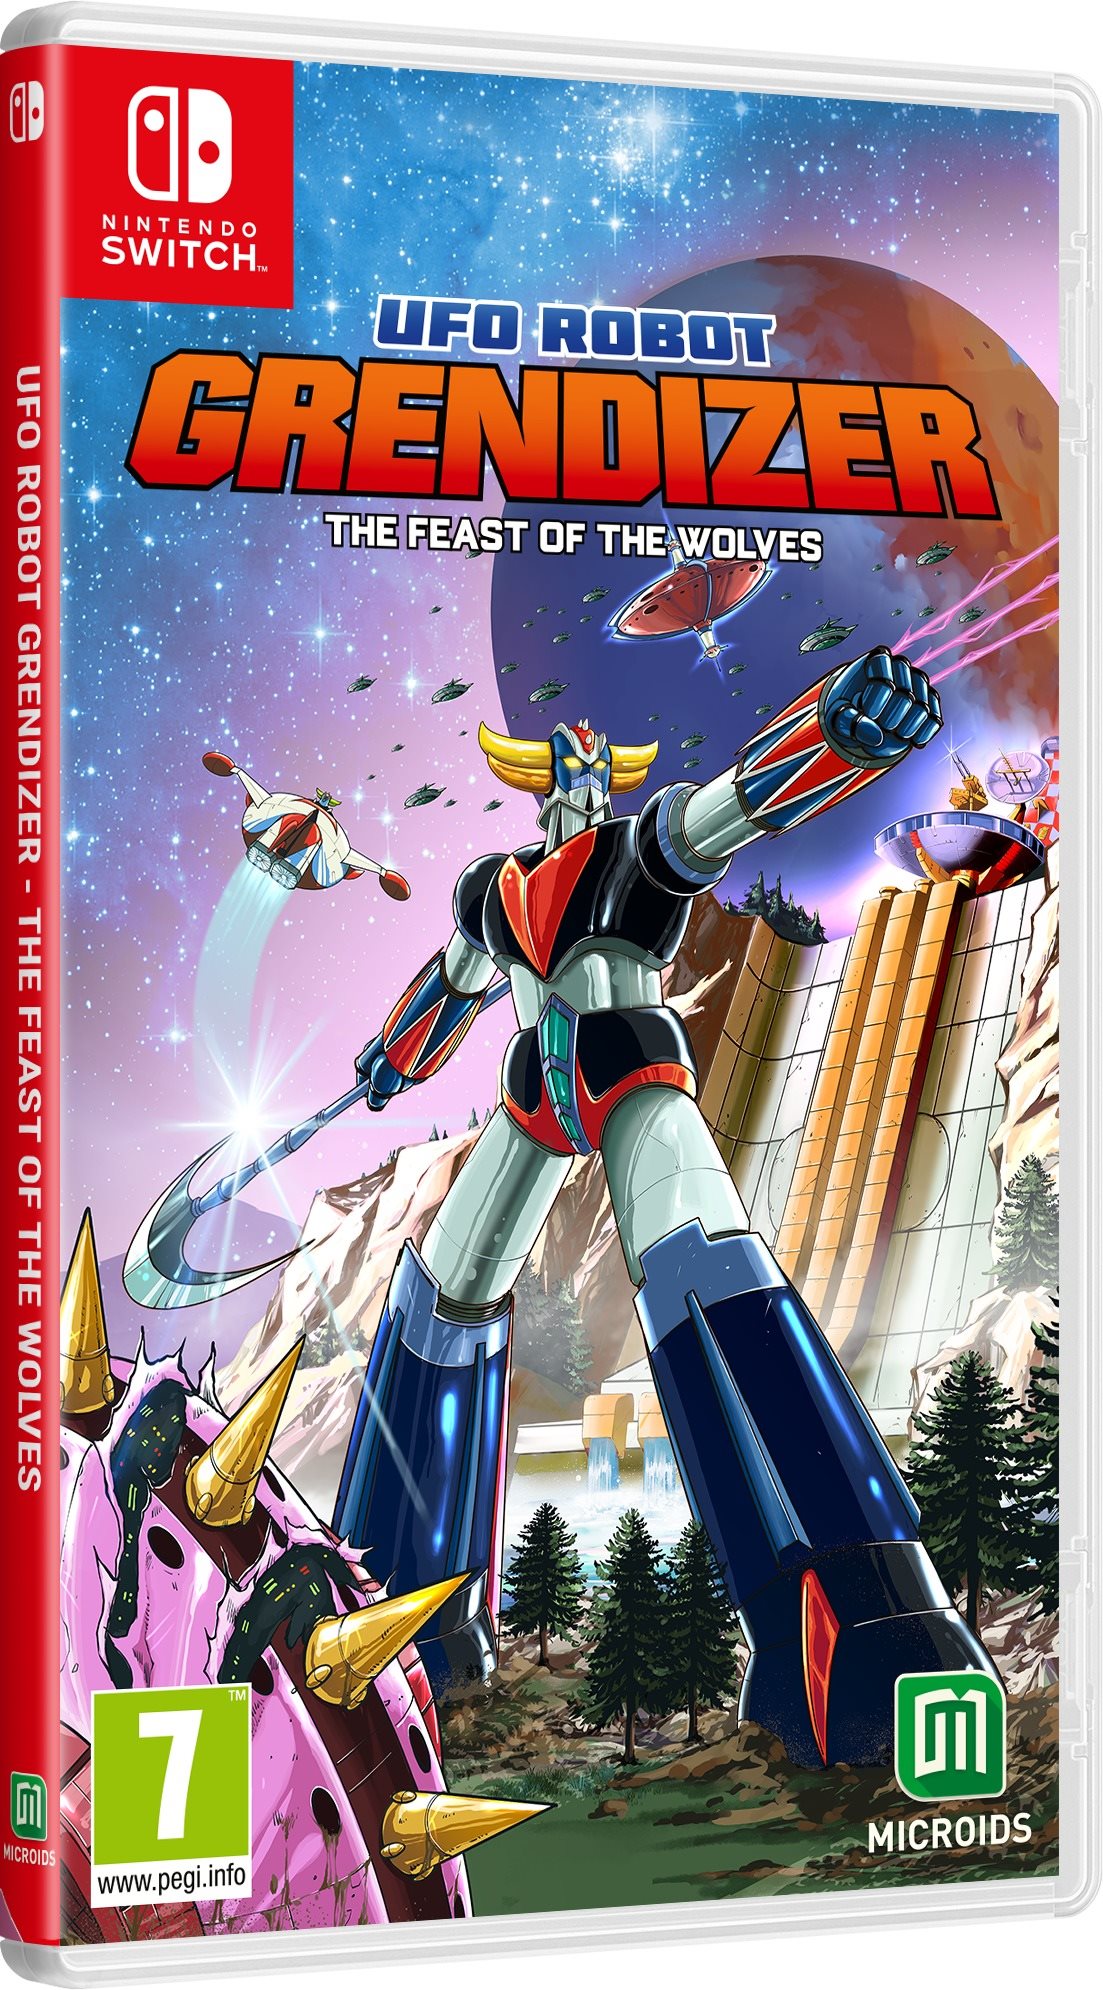 UFO Robot Grendizer: The Feast of the Wolves - Nintendo Switch